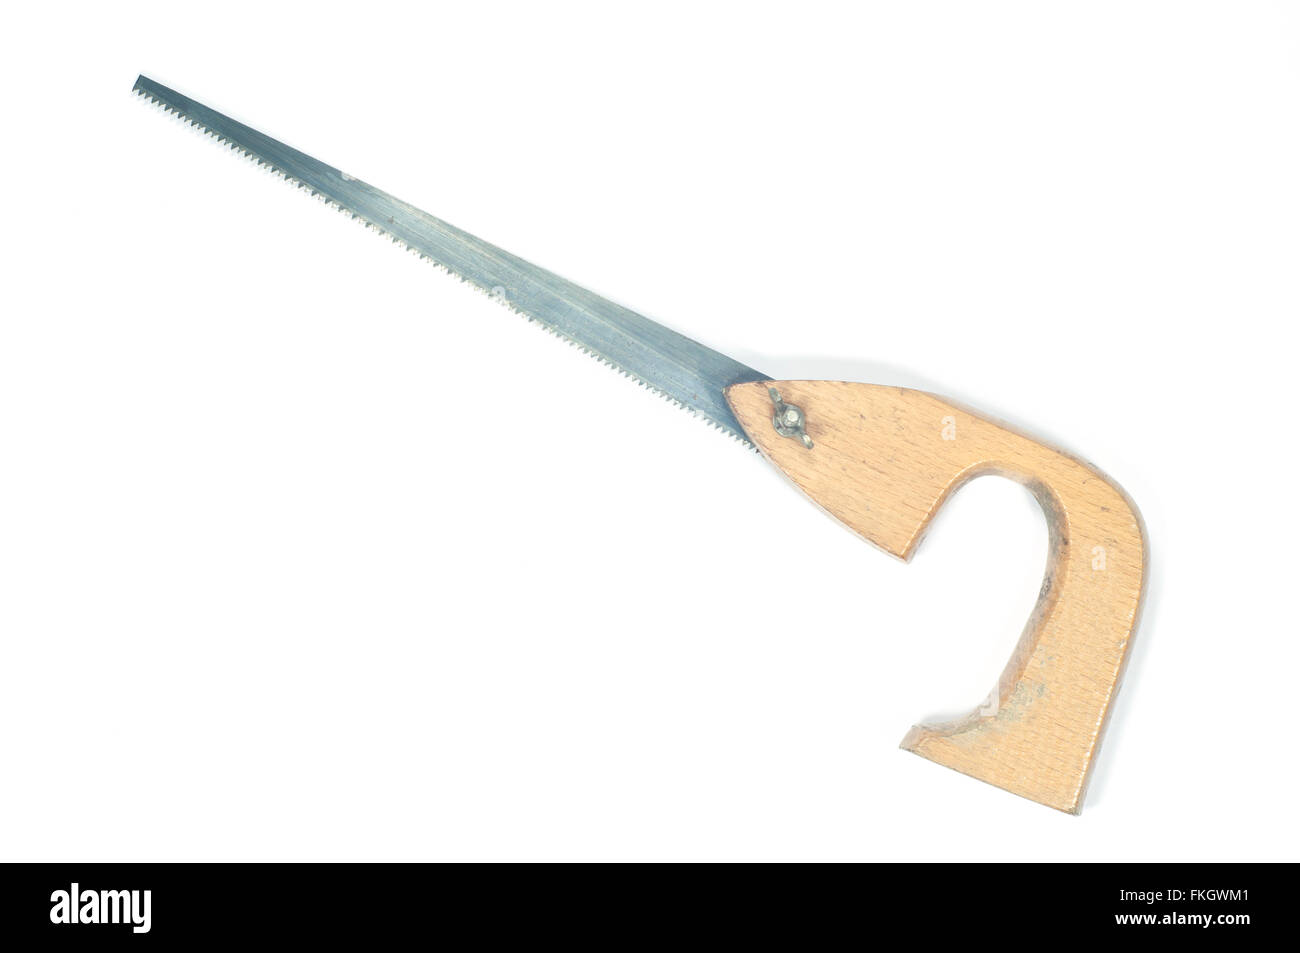 Handsaw, wood cutting tool for carpenter isolated on white background. Stock Photo